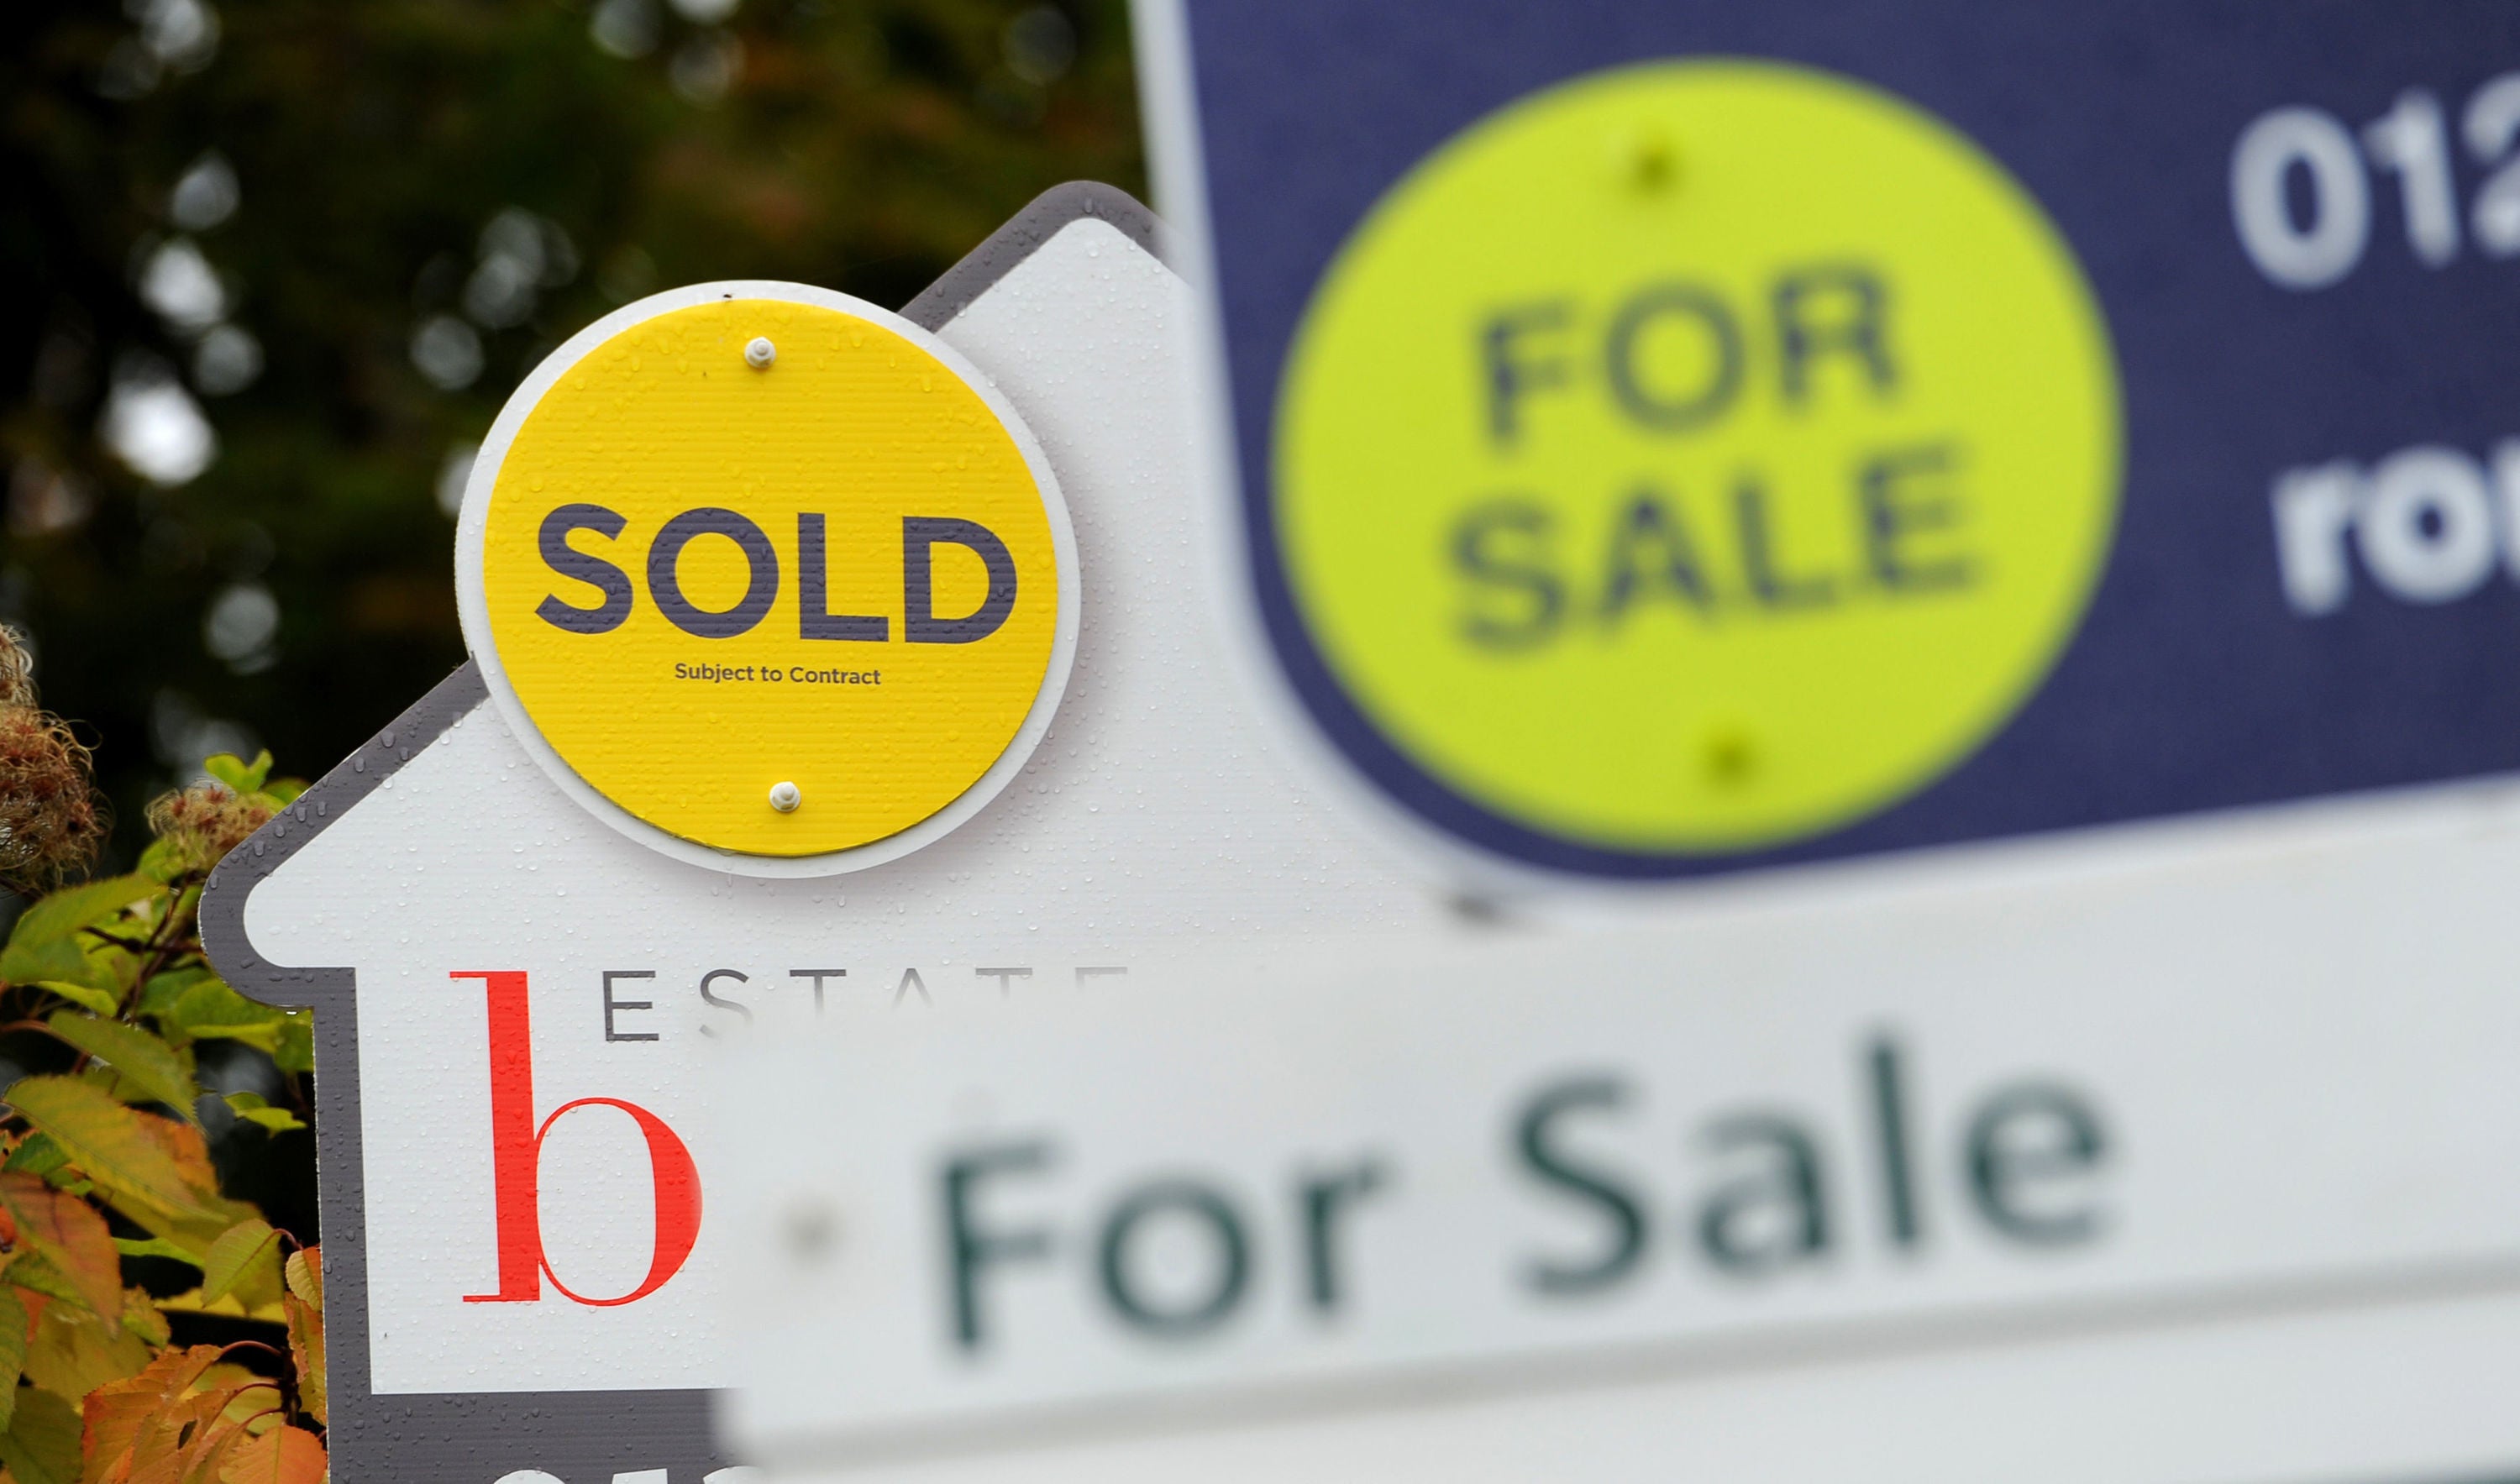 House prices in the UK were 4.5 per cent below the all-time peak in the summer of 2022